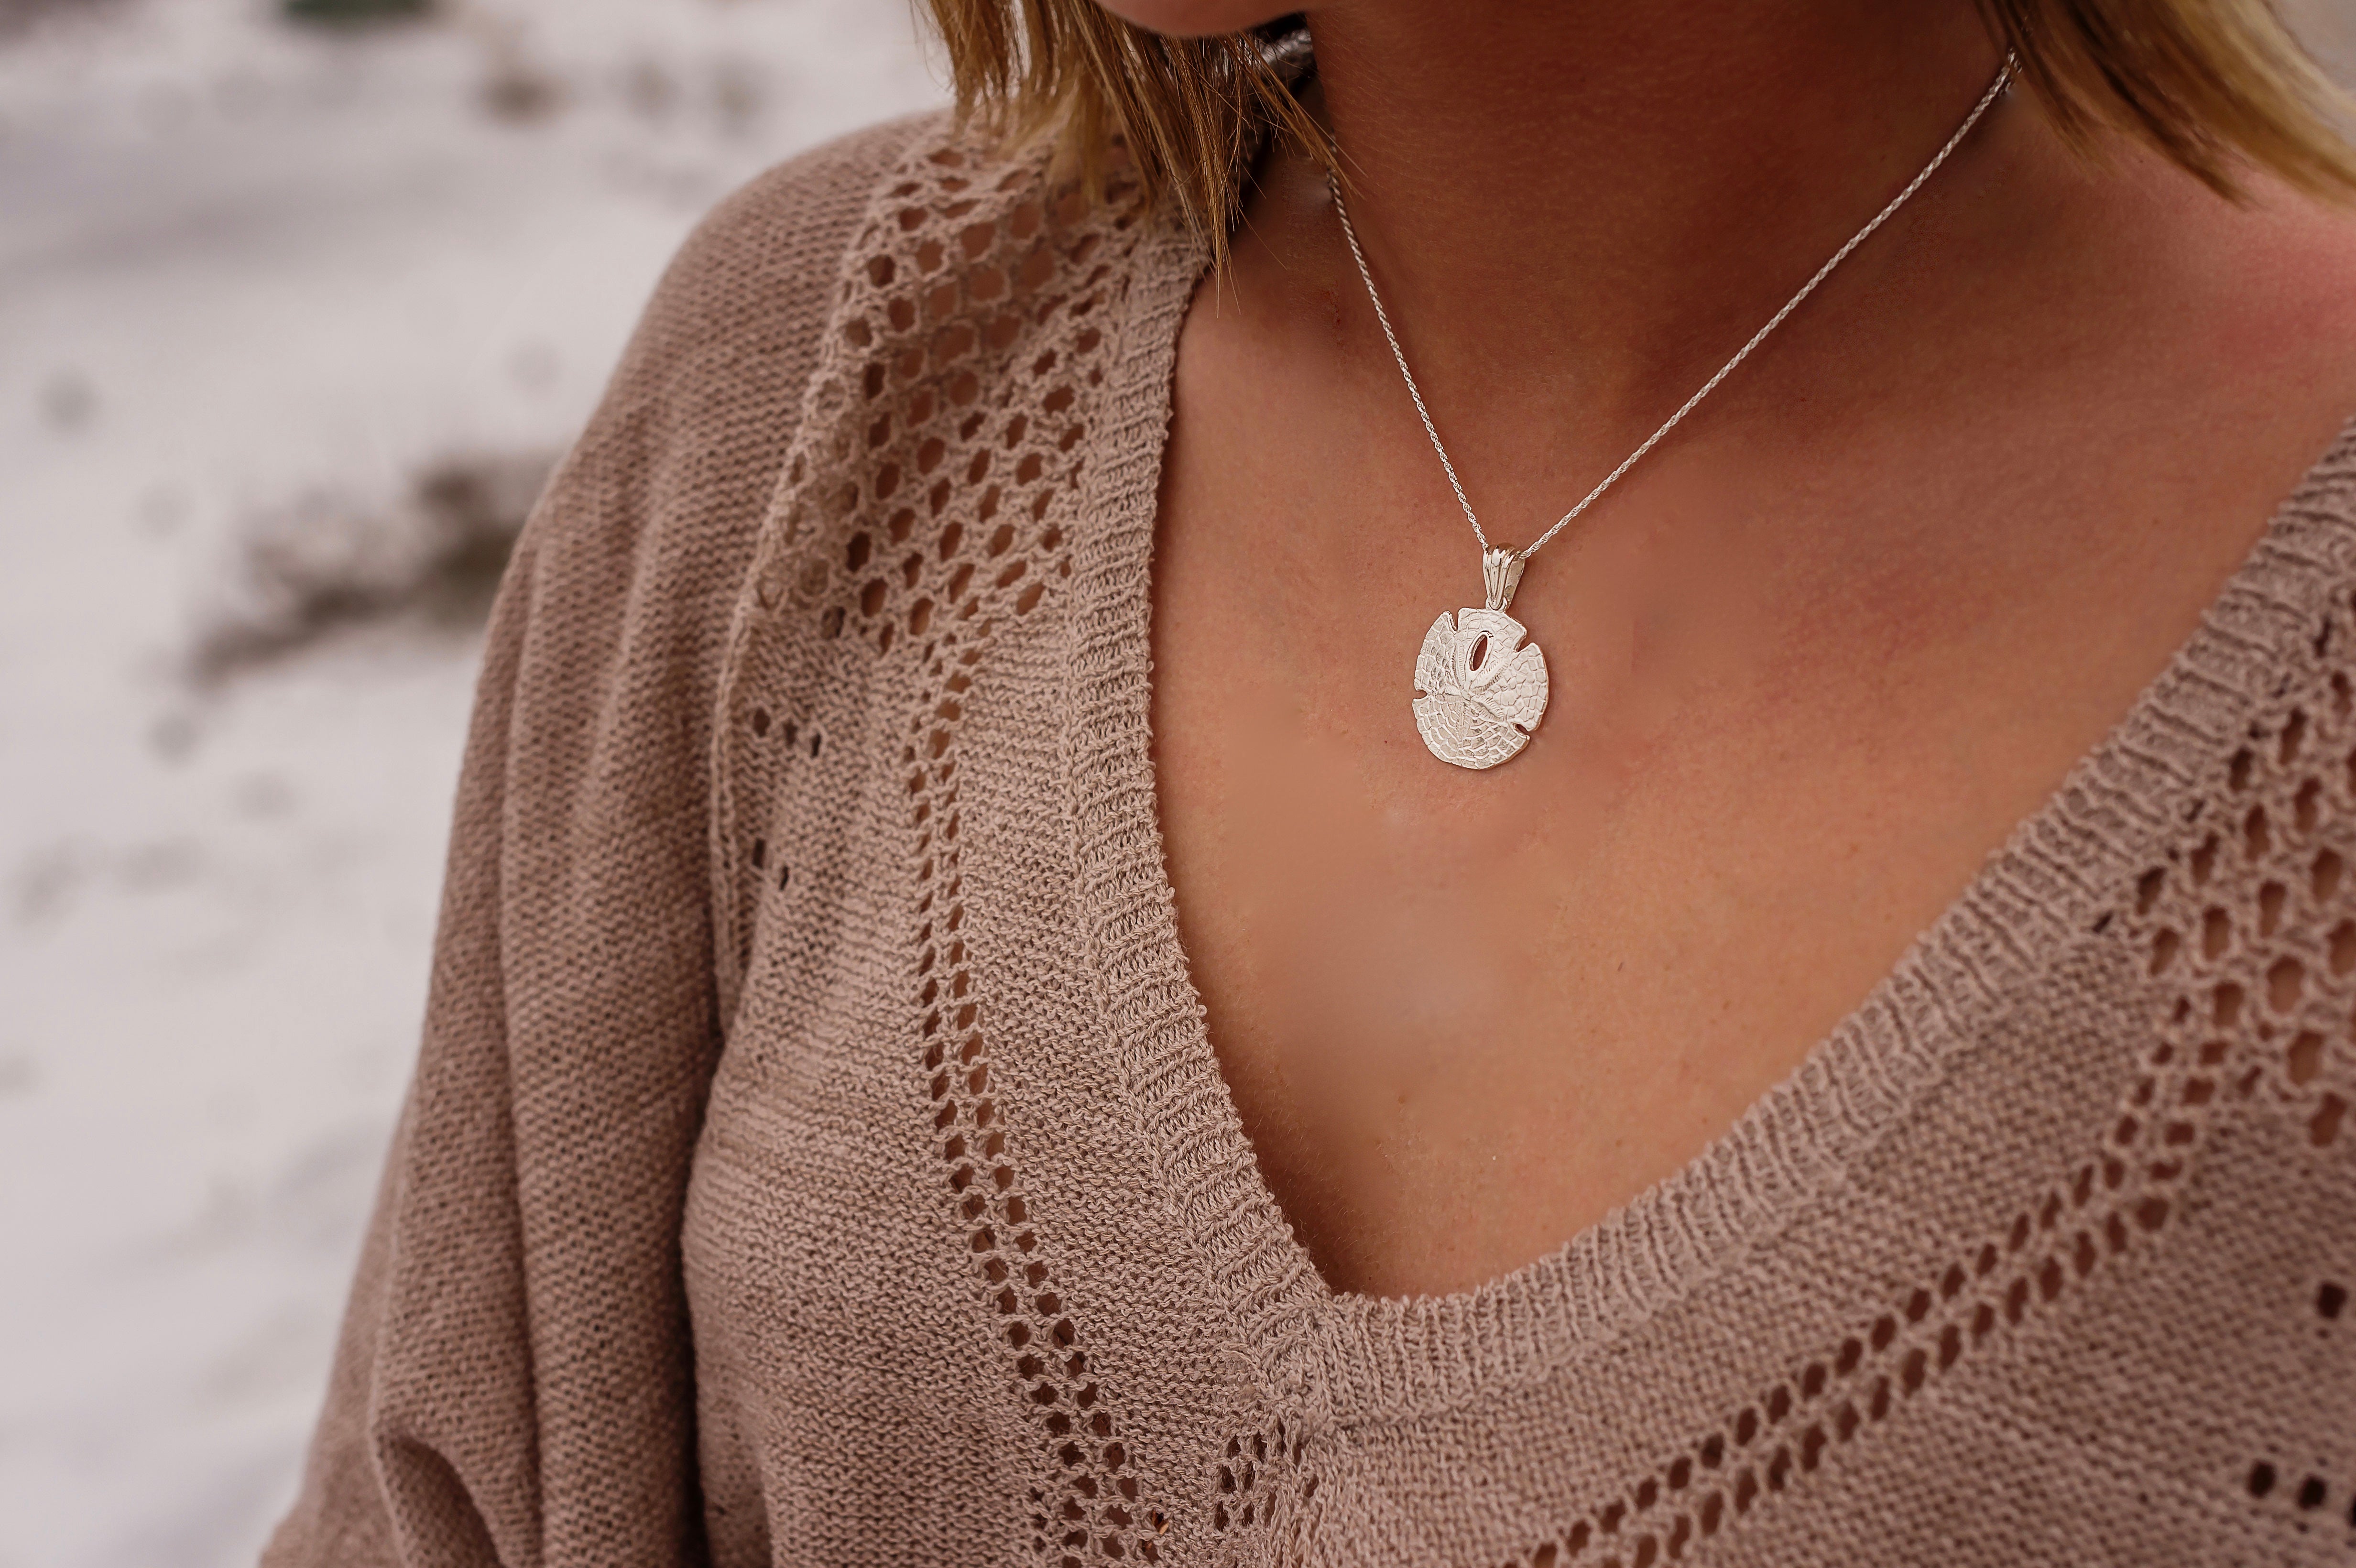 Sand Dollar Necklace | Sand dollar necklace, Shop necklaces, Necklace